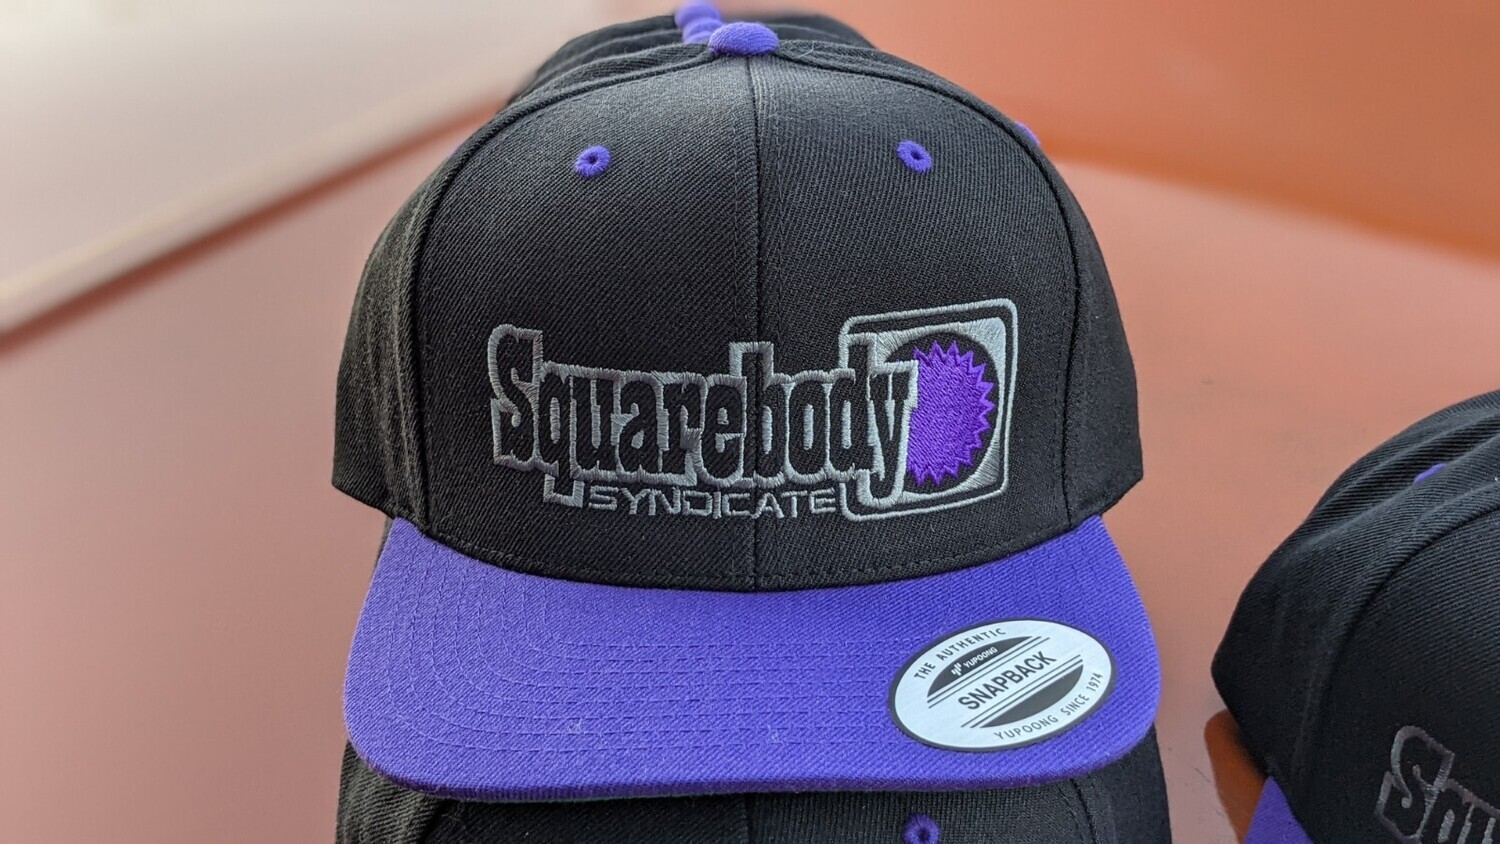 VERY LIMITED QUANTITY! CURVED PURPLE AND BLACK WITH PURPLE STAR SNAPBACK RETRO TRUCKER MESH SBS LOGO #4 HAT